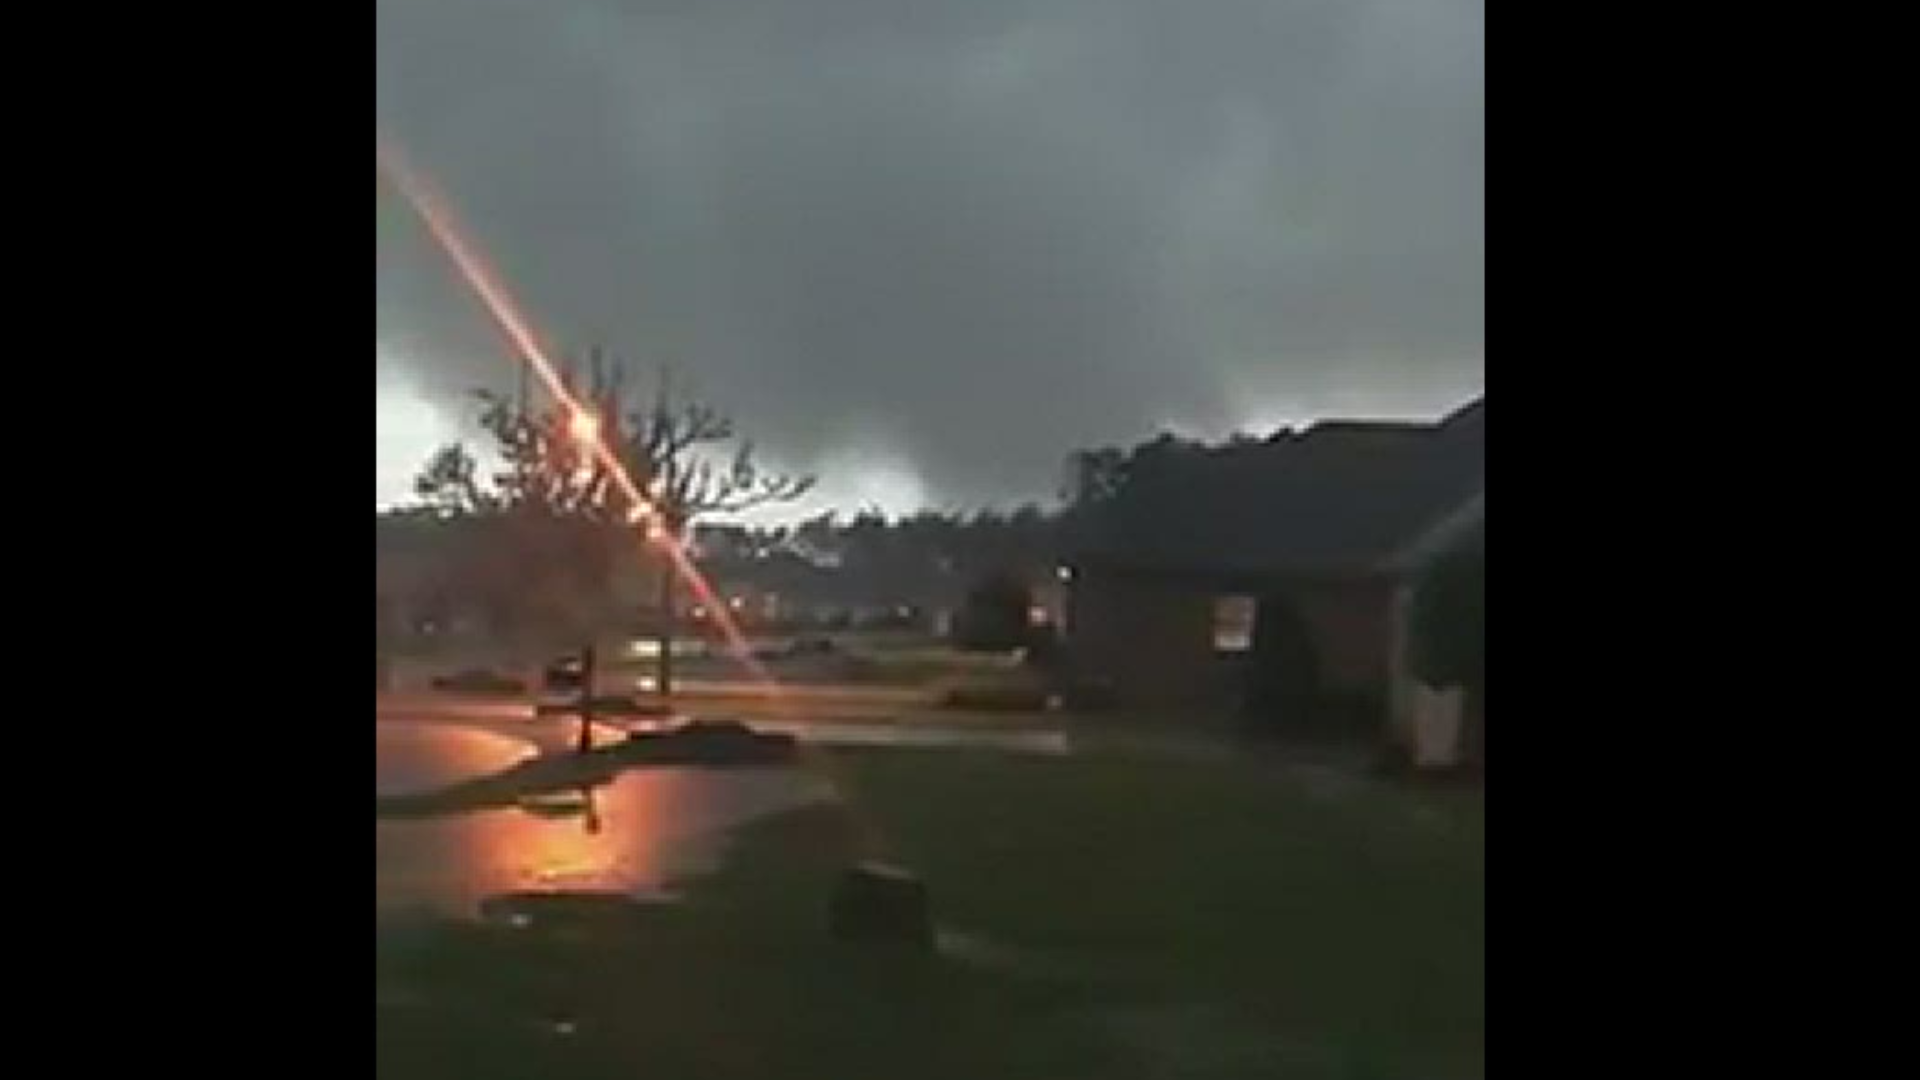 The video of what appears to be a tornado in or near Madisonville on Thursday night comes from viewer Courtney Turner Kleeb.